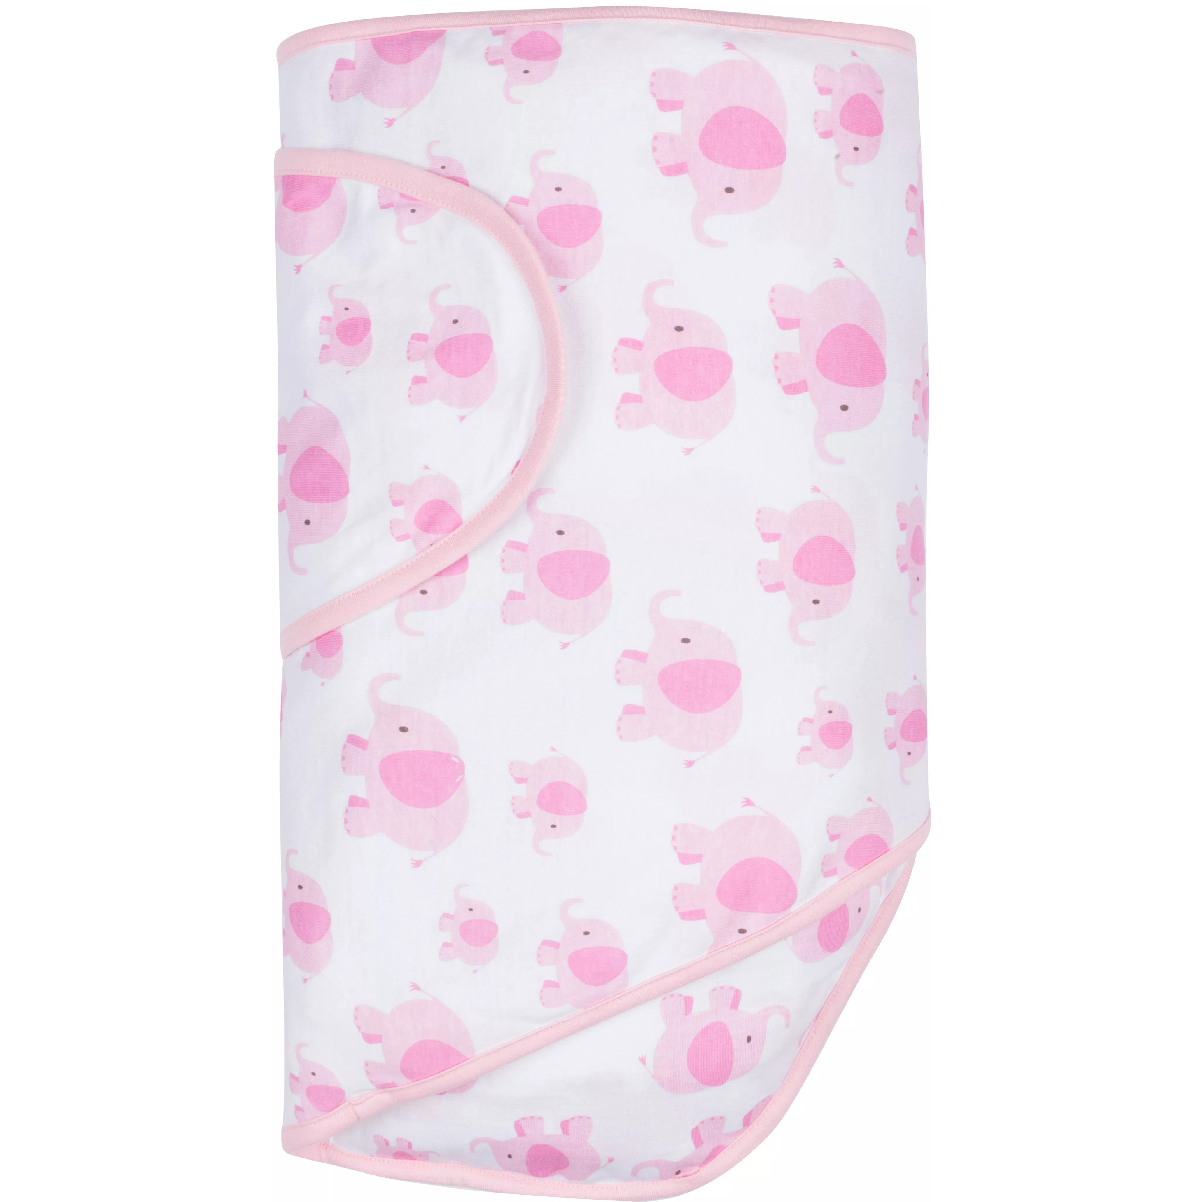 Pink print The Miracle Blanket® makes it easy to get the perfect swaddle every time!  The fabric is a super soft cotton knit selected for several good reasons: It’s breathable so that it can be used in warm climates while still being luxurious enough to keep your baby warm in cooler places; It has just enough stretch to absorb your baby’s movements without coming undone but it’s not so stretchy that it won’t stay tight.   